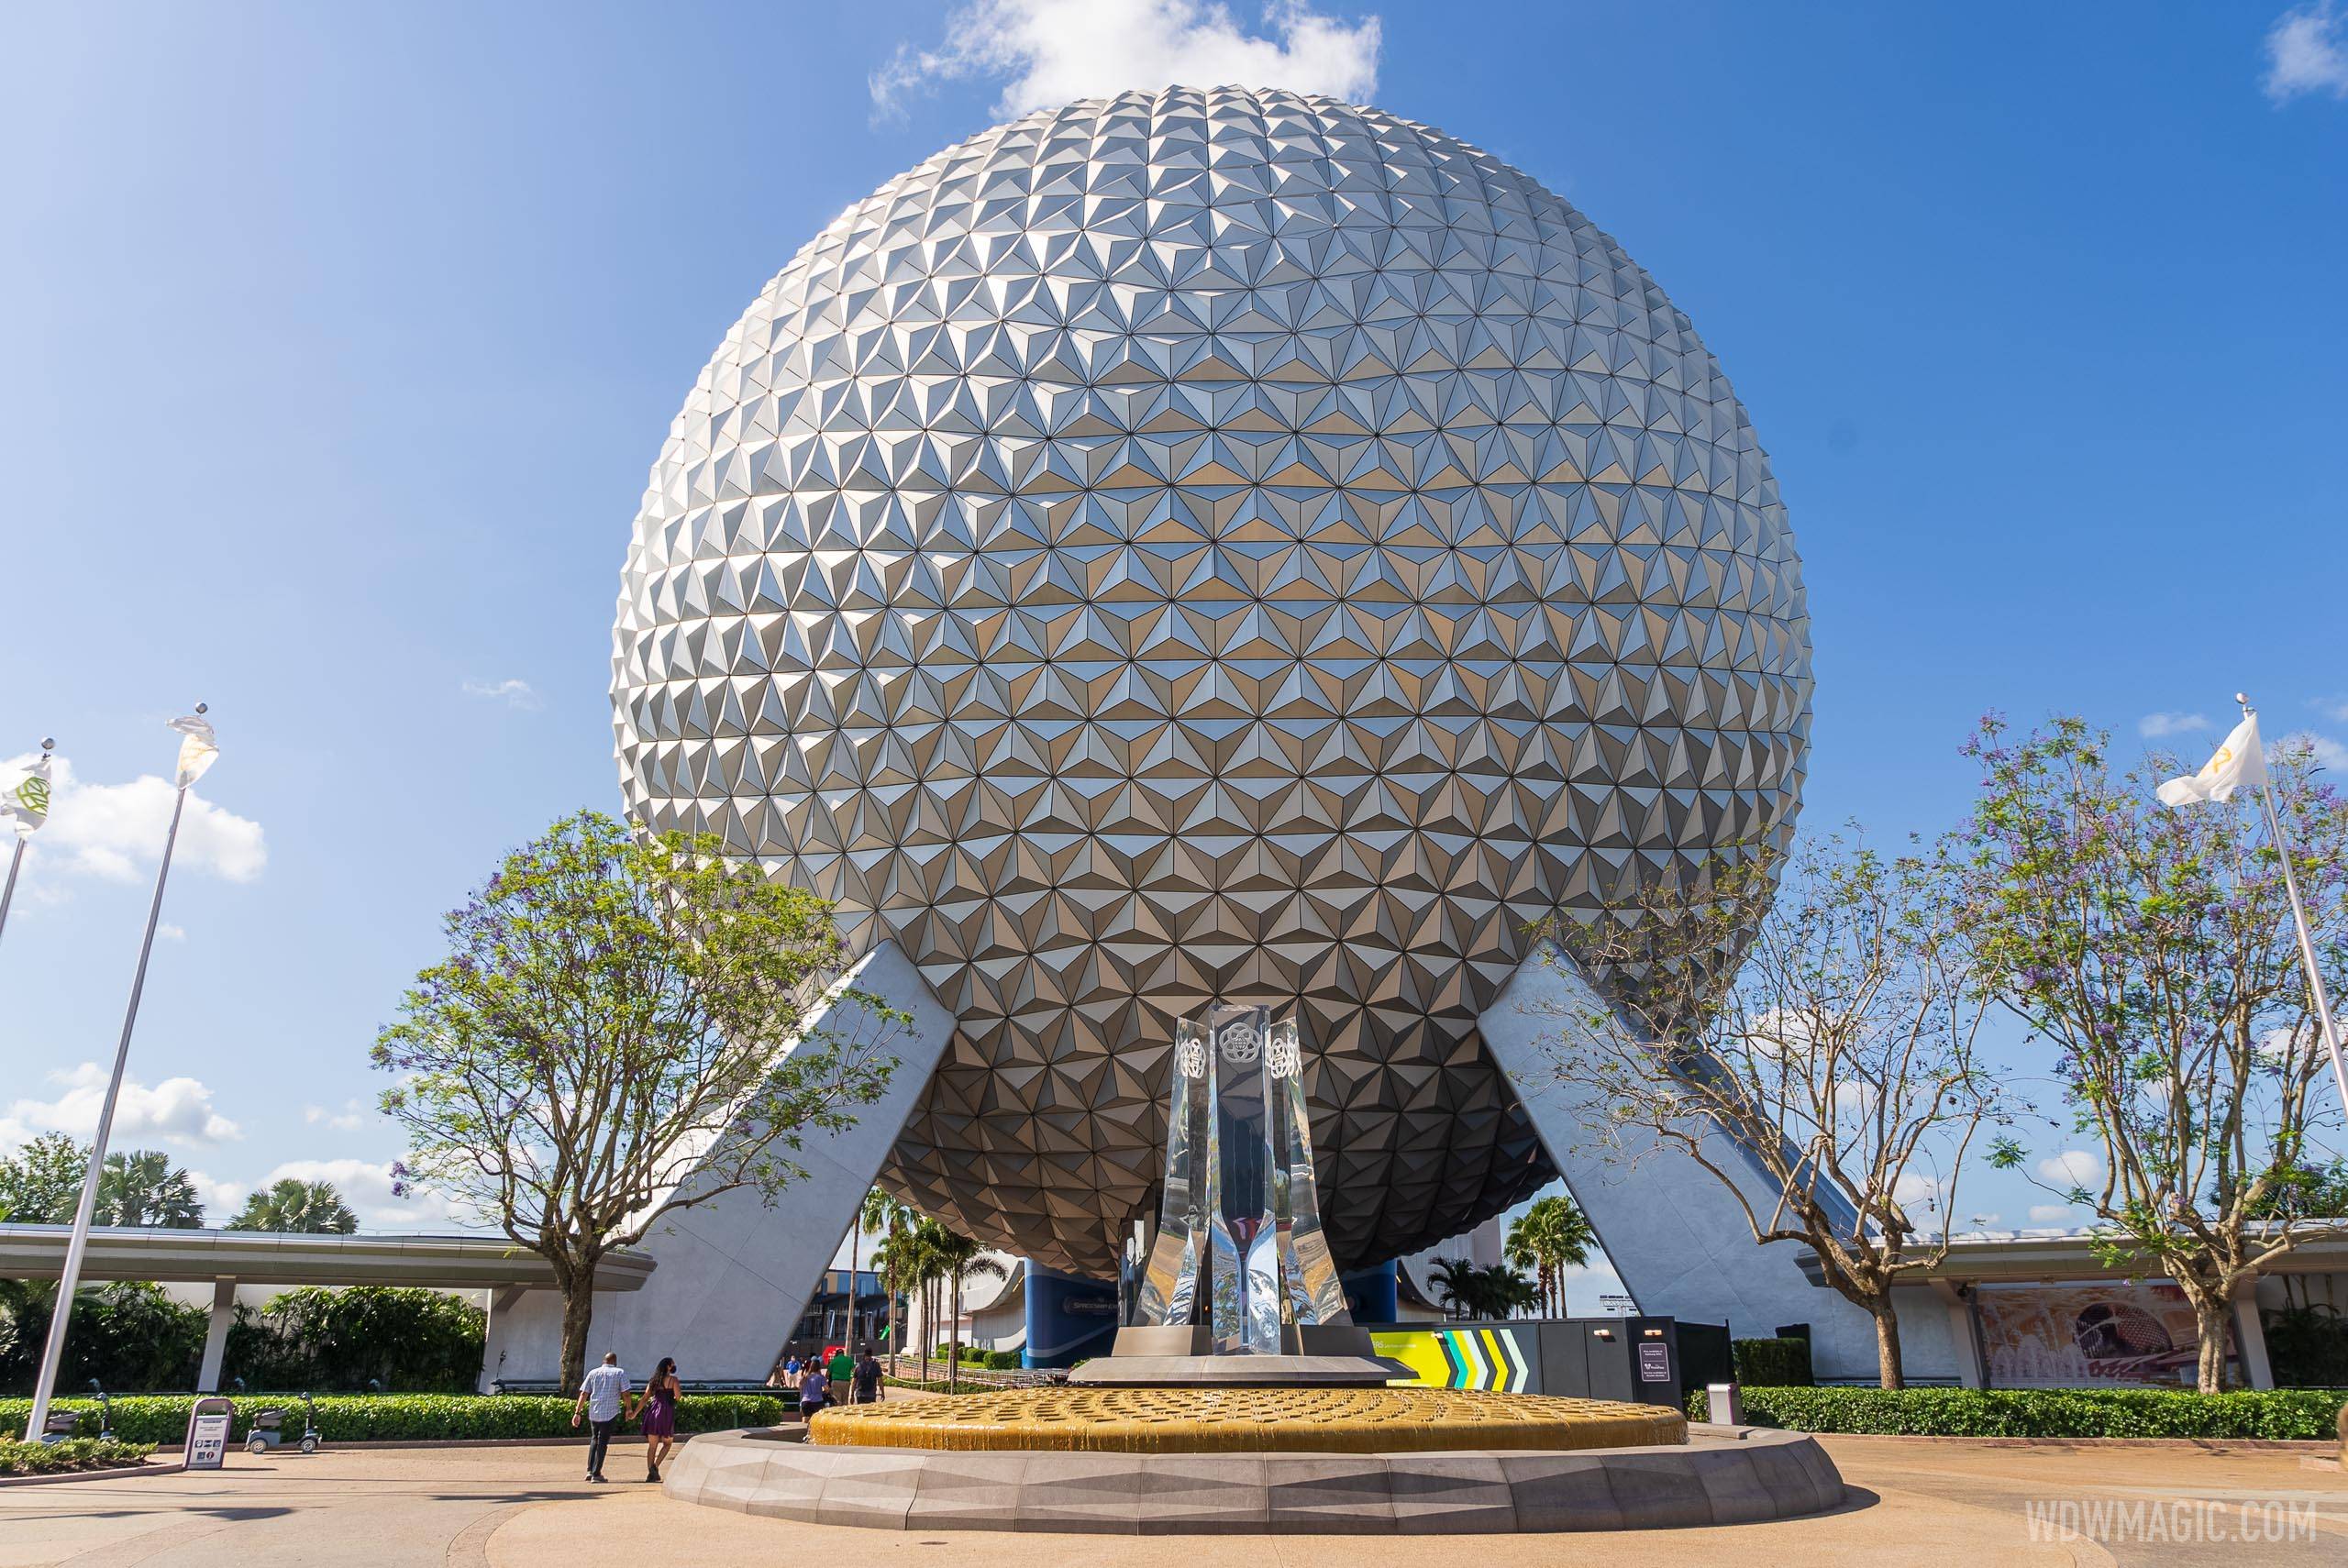 Spaceship Earth point of lights installation - April 28 2021